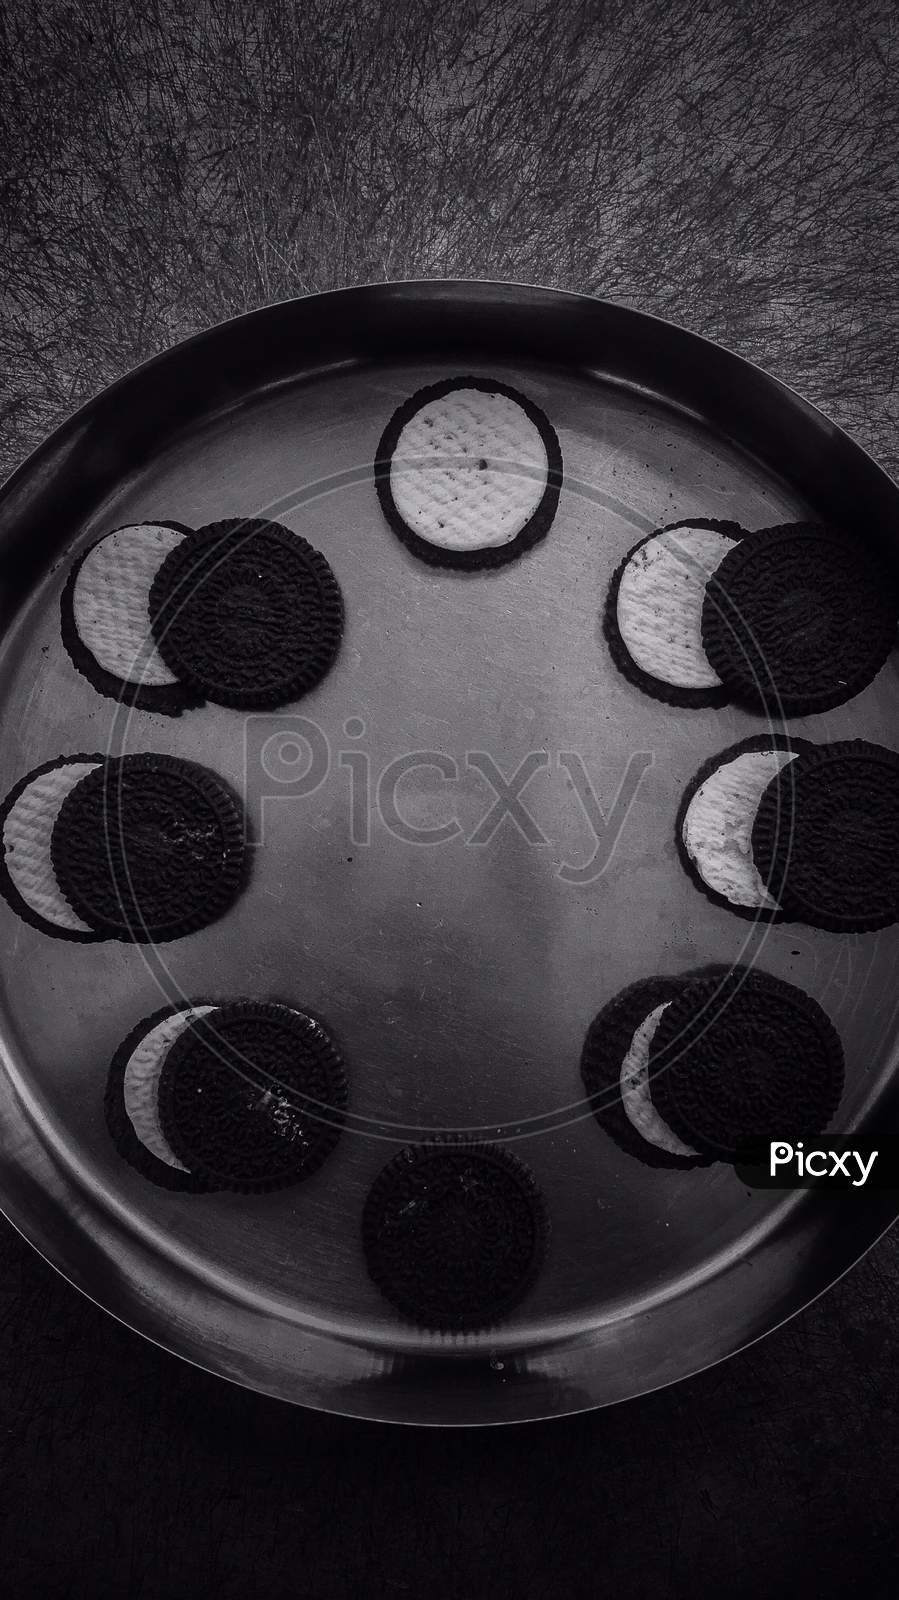 Oreo biscuits as moon phases